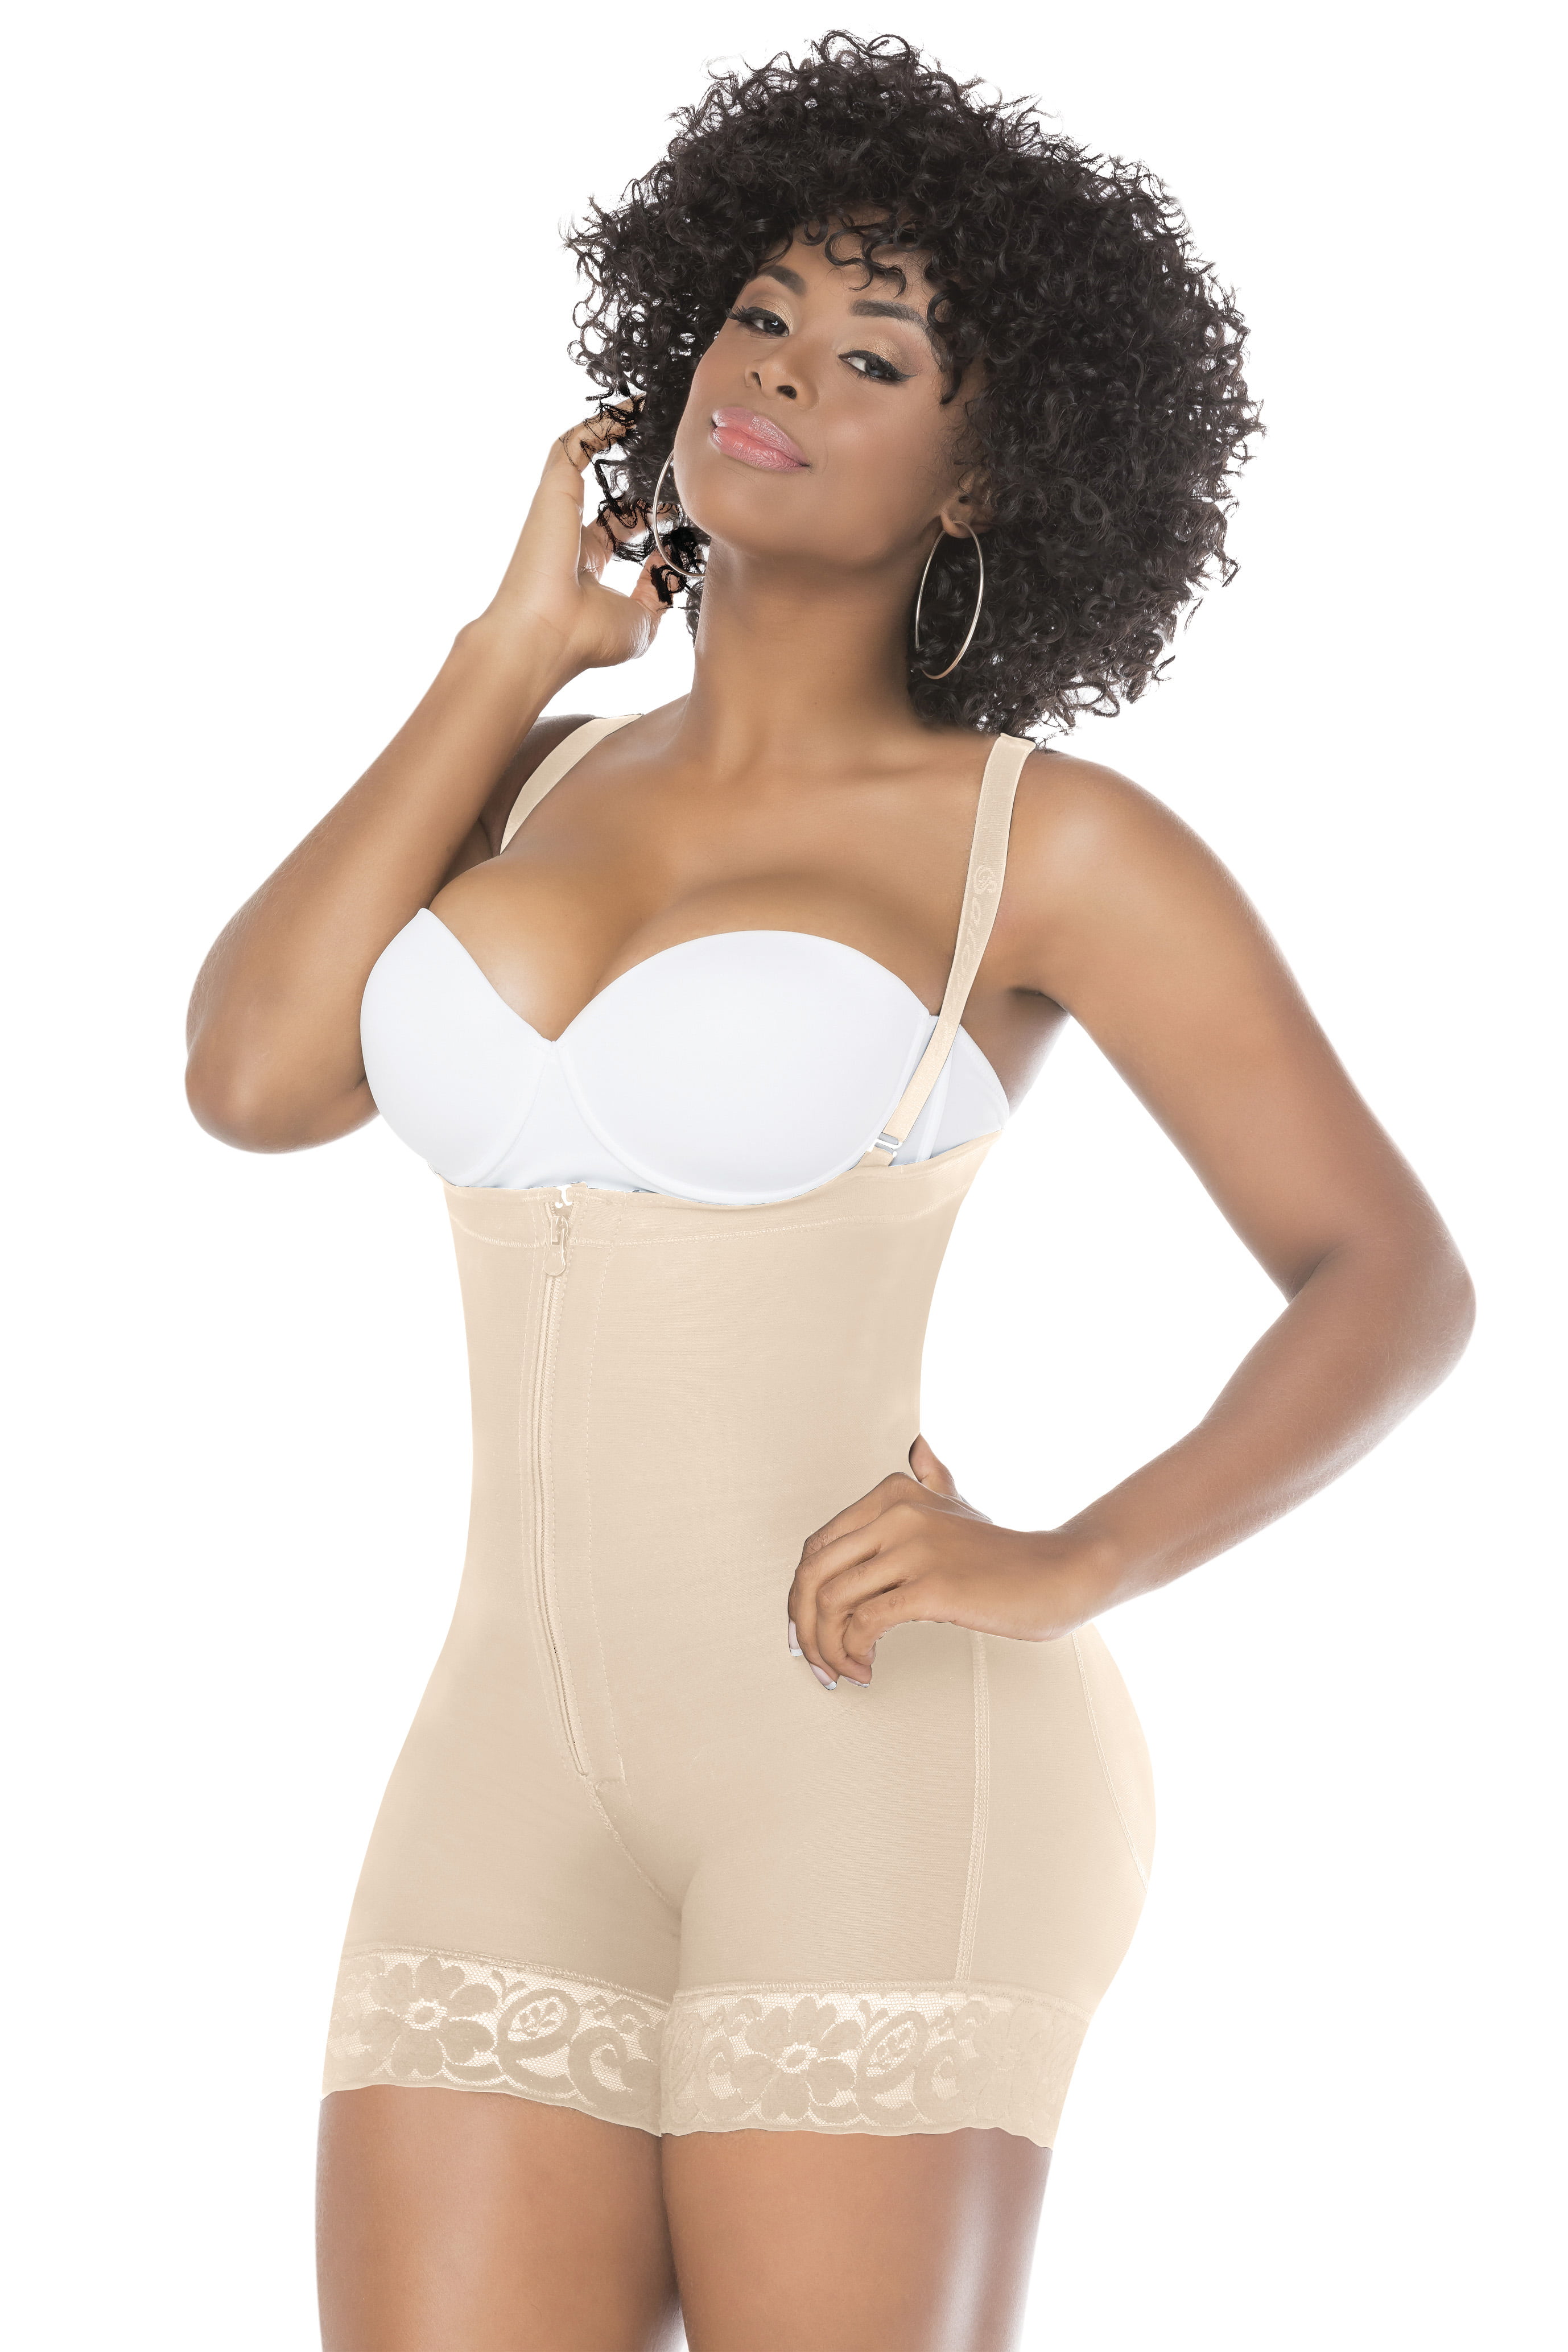 Salome Fajas Colombianas Mid Thigh Shapewear Butt Lifter Strapless